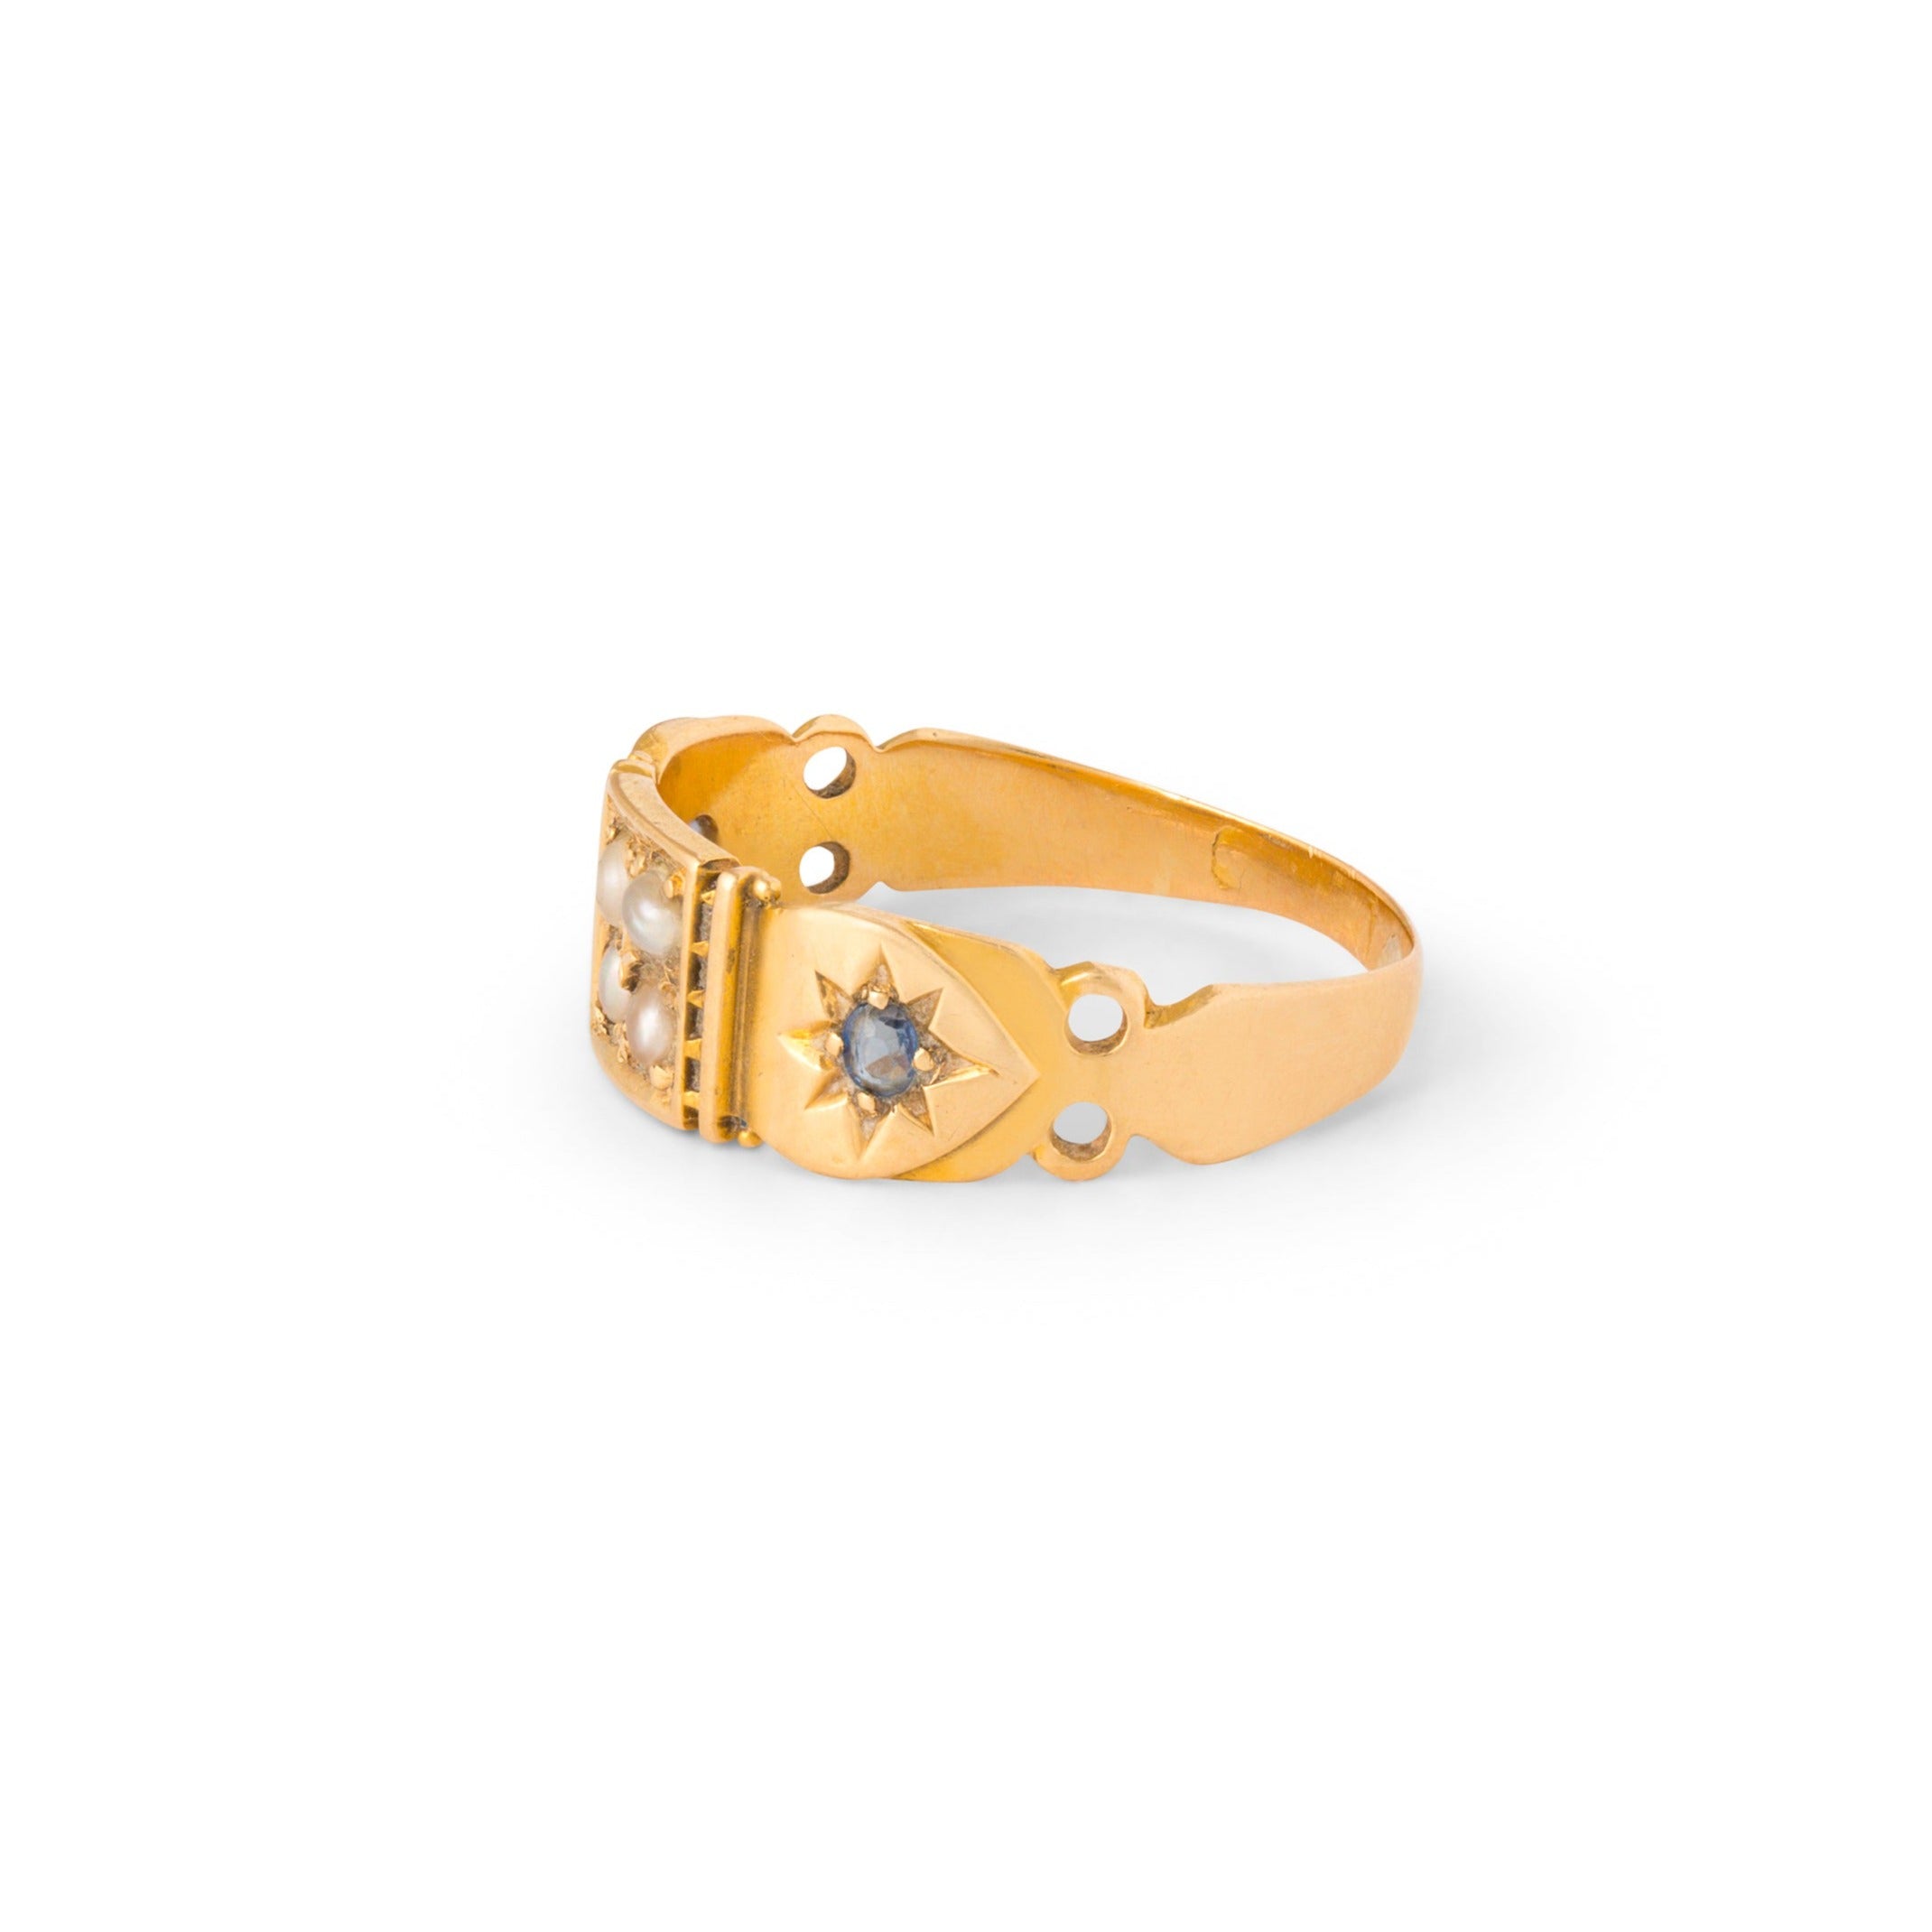 English Victorian Sapphire, Pearl, and 18k Gold Starburst Ring